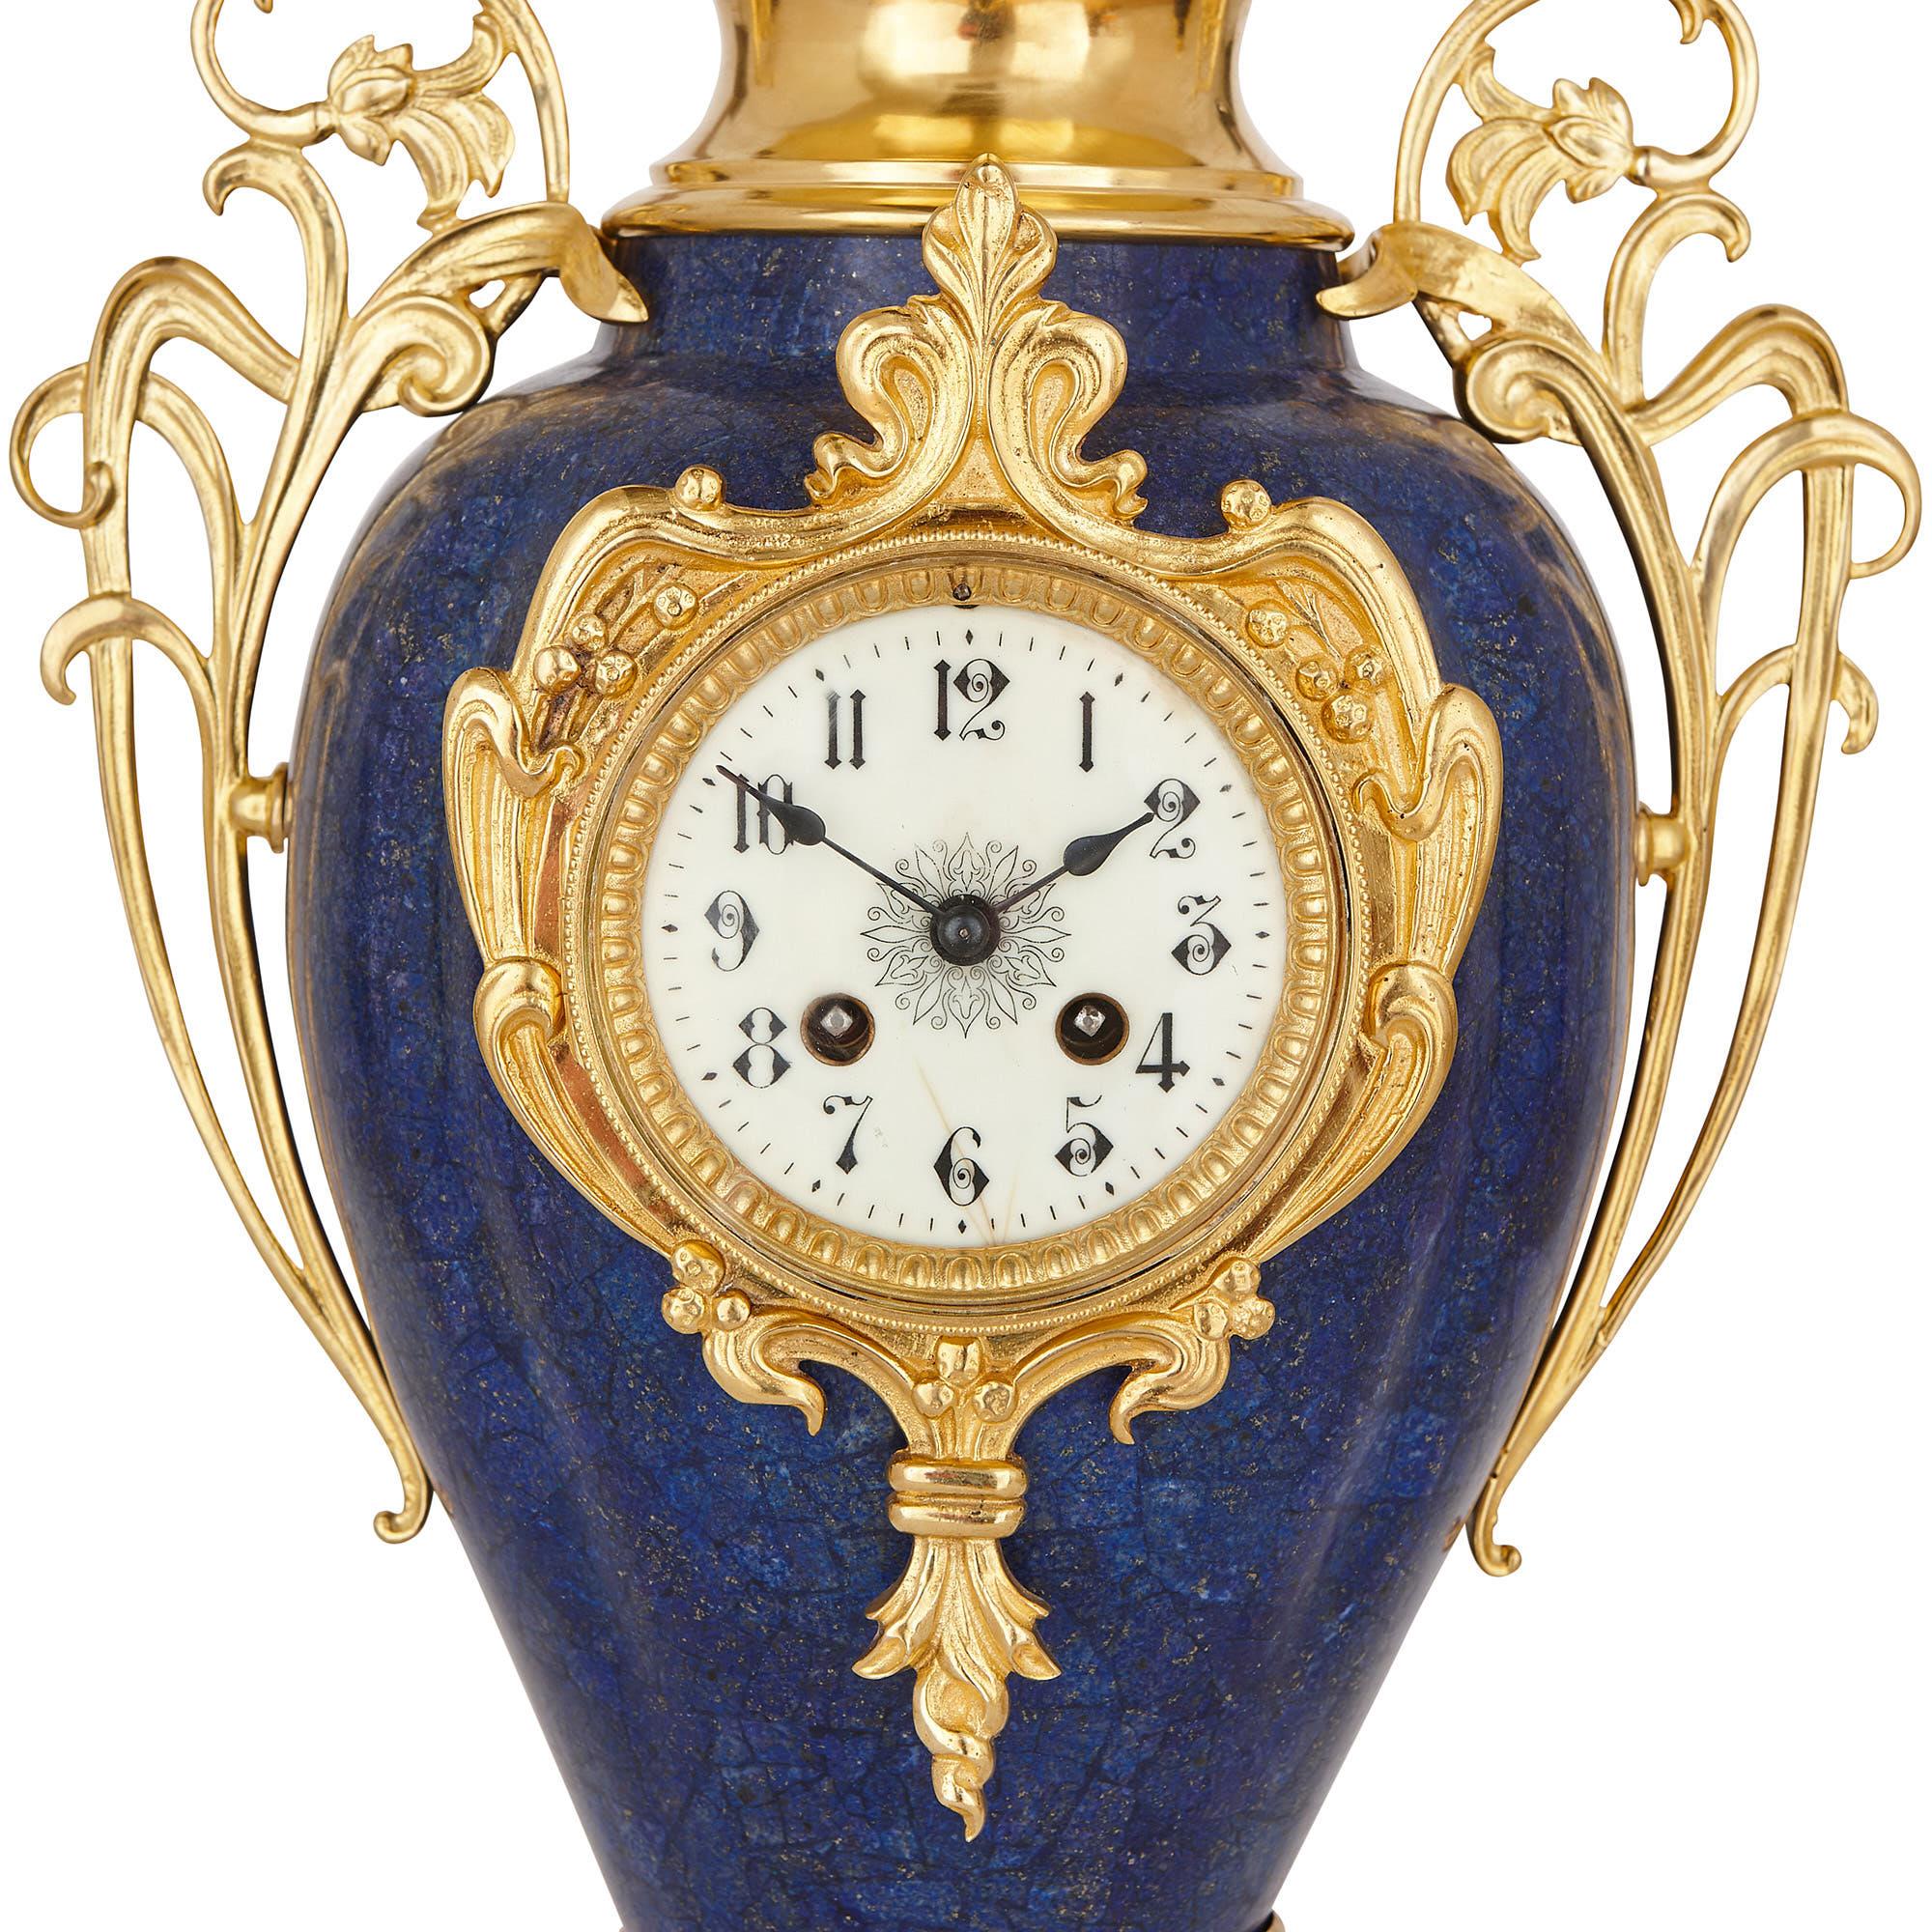 This clock set is designed in the Art Nouveau style, which was popular in France in the early 20th century. The set is comprised of a tall central clock and two slightly smaller flanking vases. The items have been crafted from gilt bronze, and more